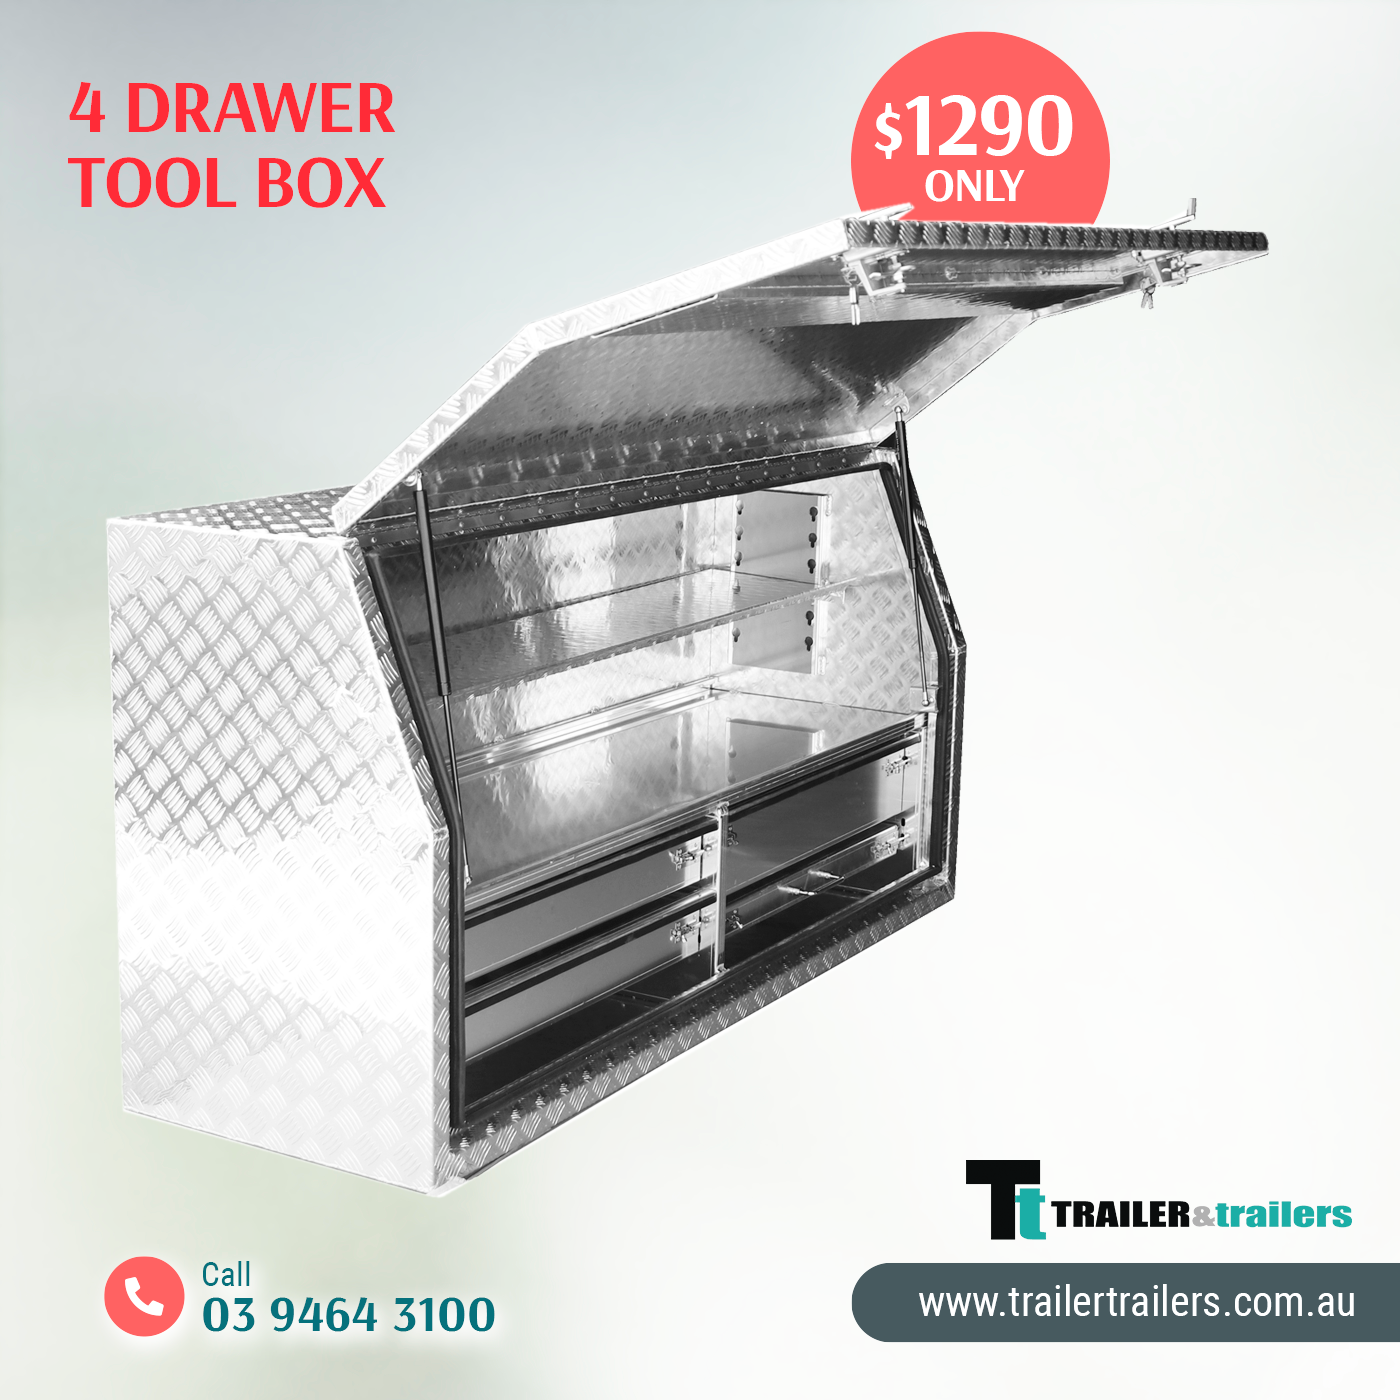 4 Drawer Tool Box for Sale Melbourne